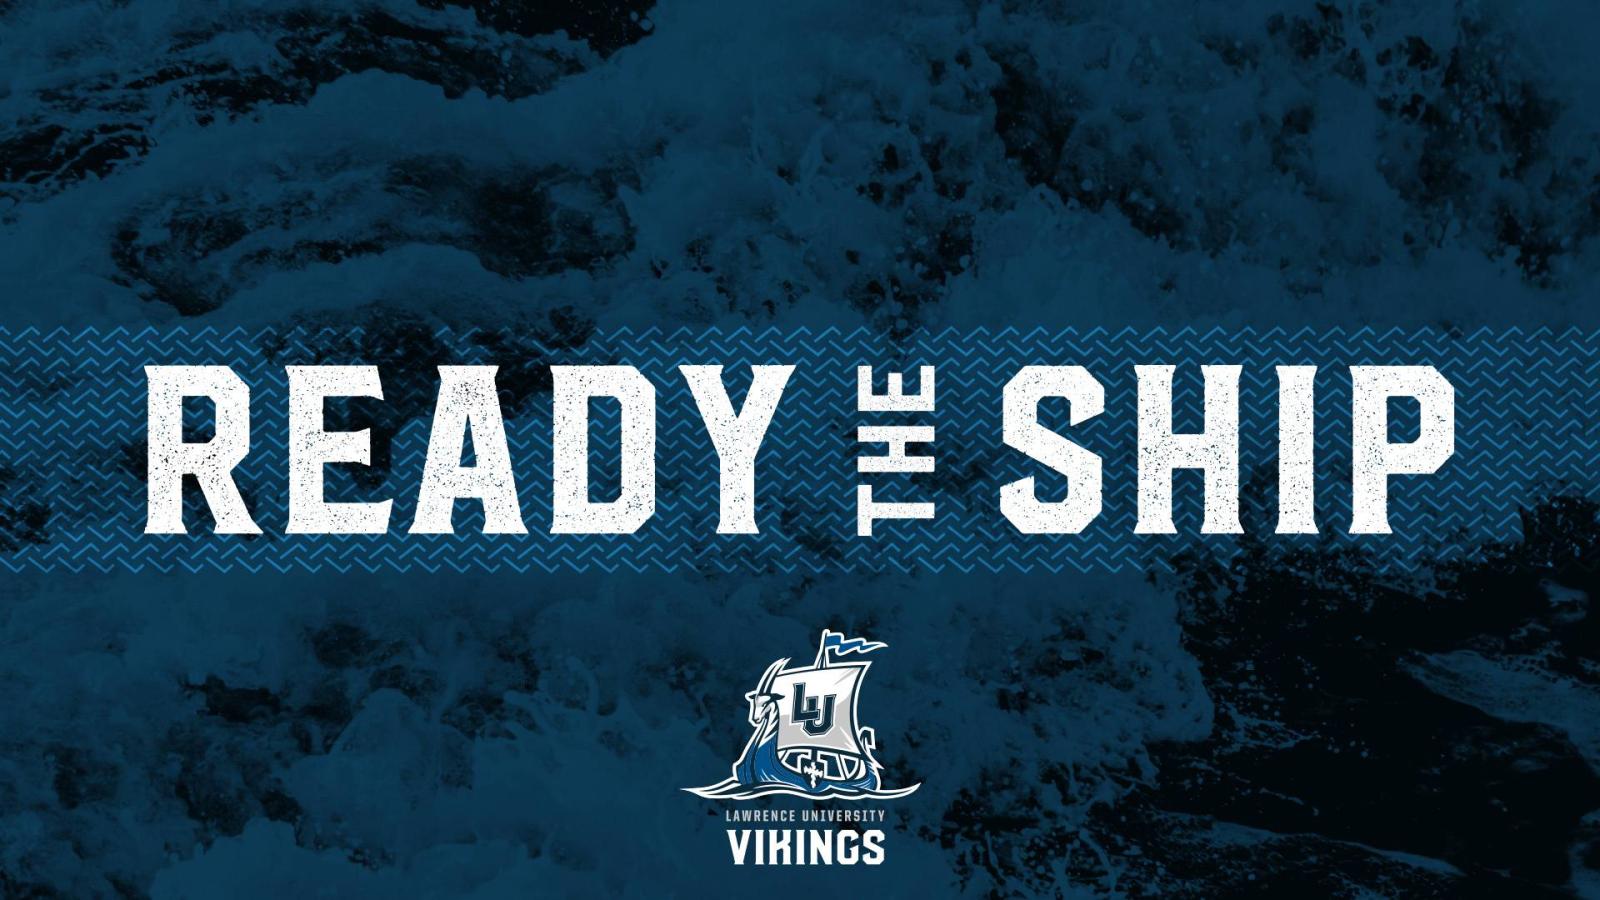 Banner with "Ready the Ship" in text written across the middle and a small LU Vikings logo center bottom.